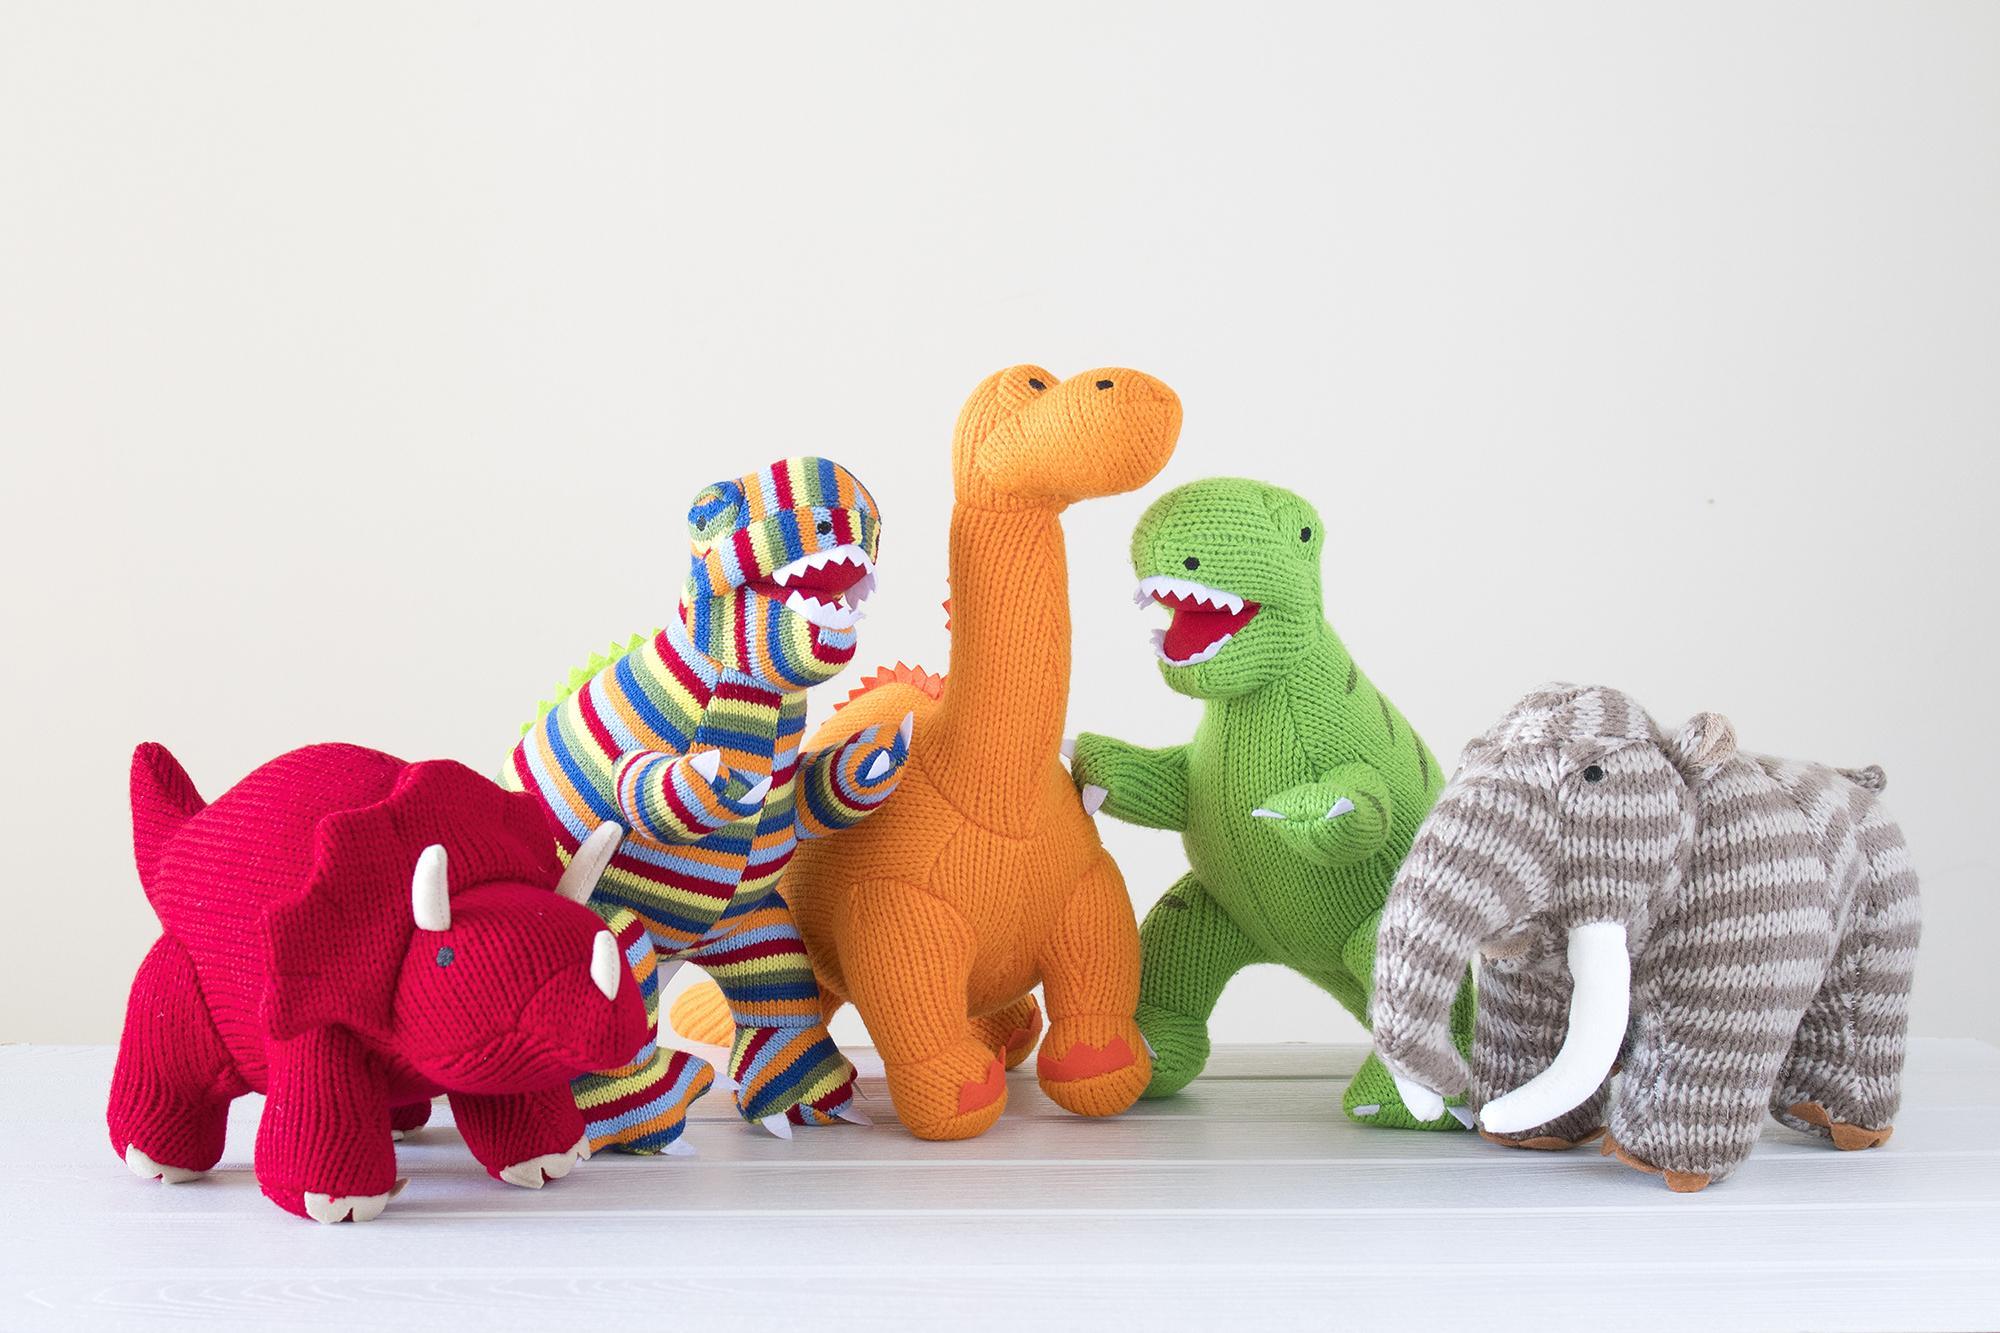 Dinosaur toys and rattles